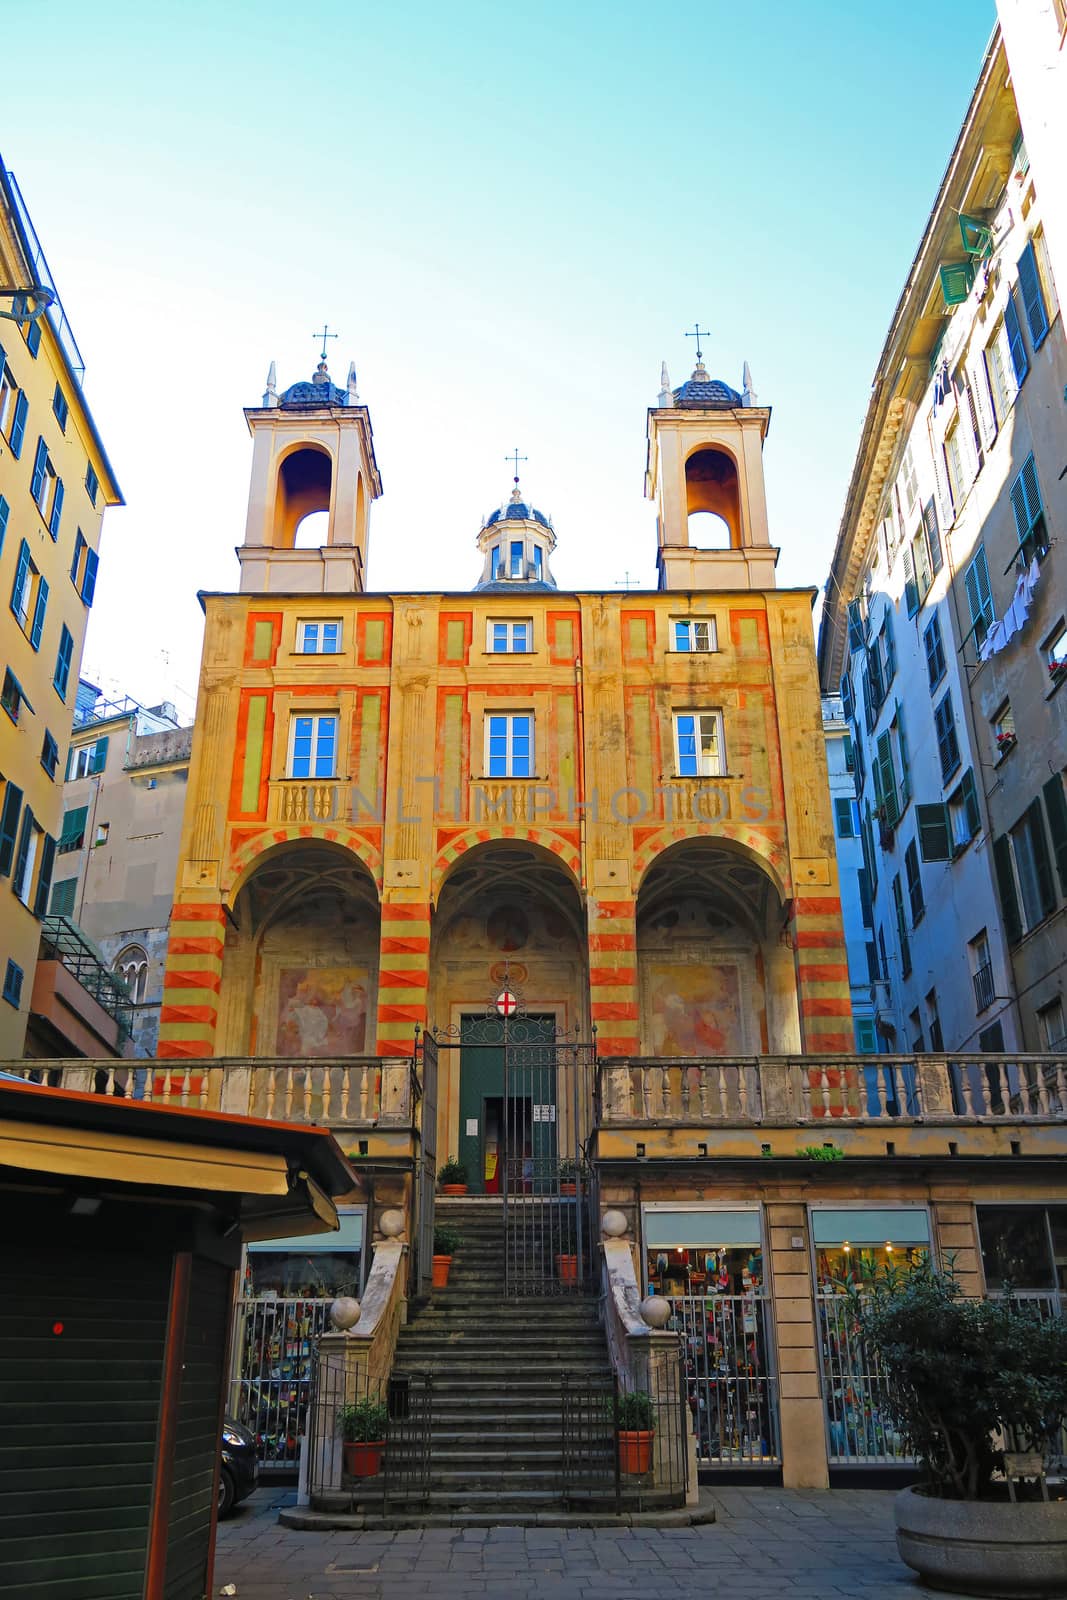 Genova,Italy,17 january 2016.View of the facade of the church of San Pietro in Banchi, in the historic center of Genoa. It was built between 1572 and 1585.